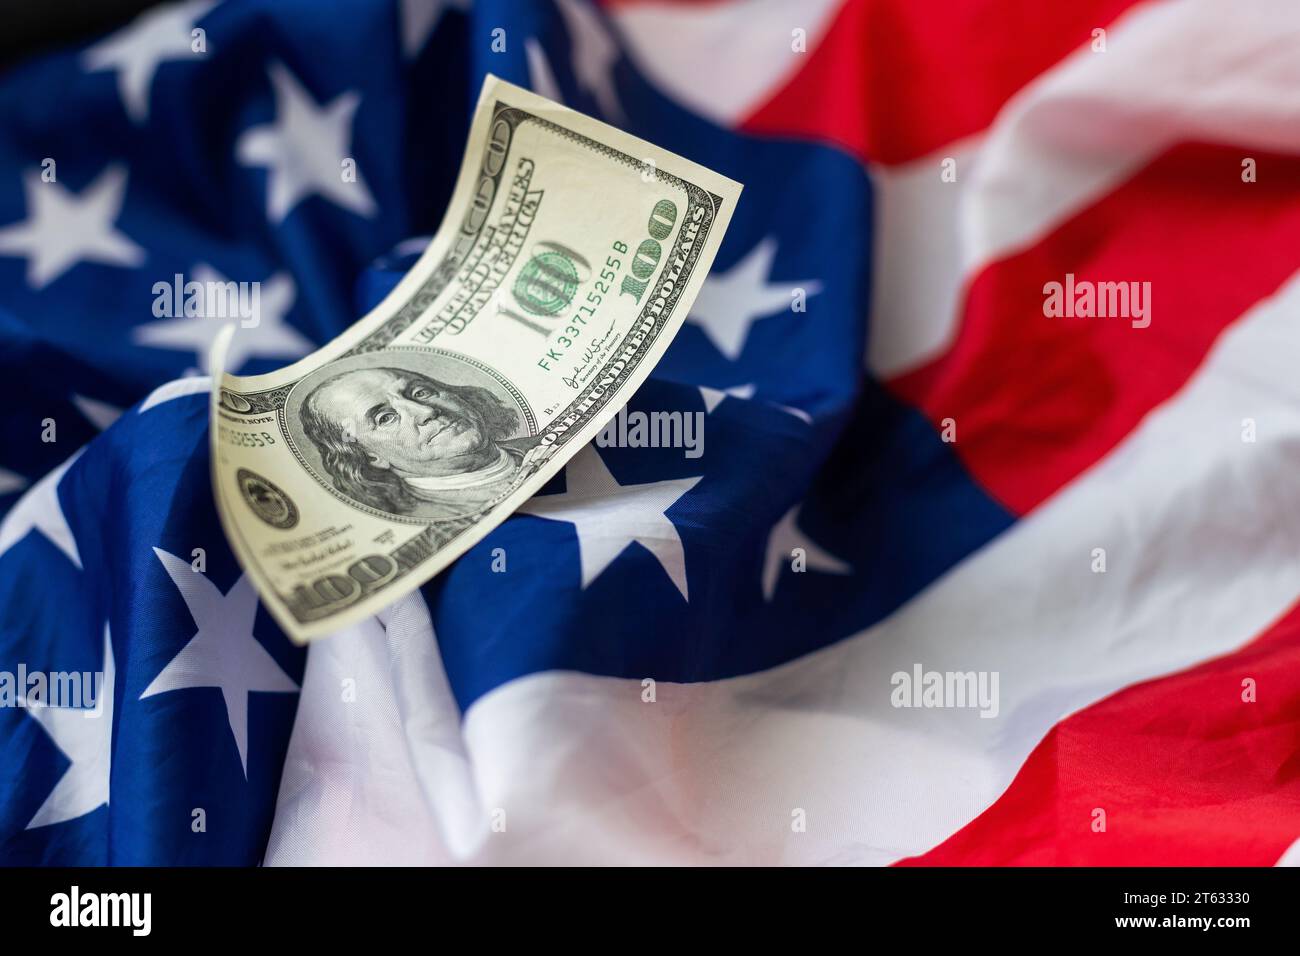 A hundred-dollar bill with the American flag. Crumpled dollars. Stock Photo